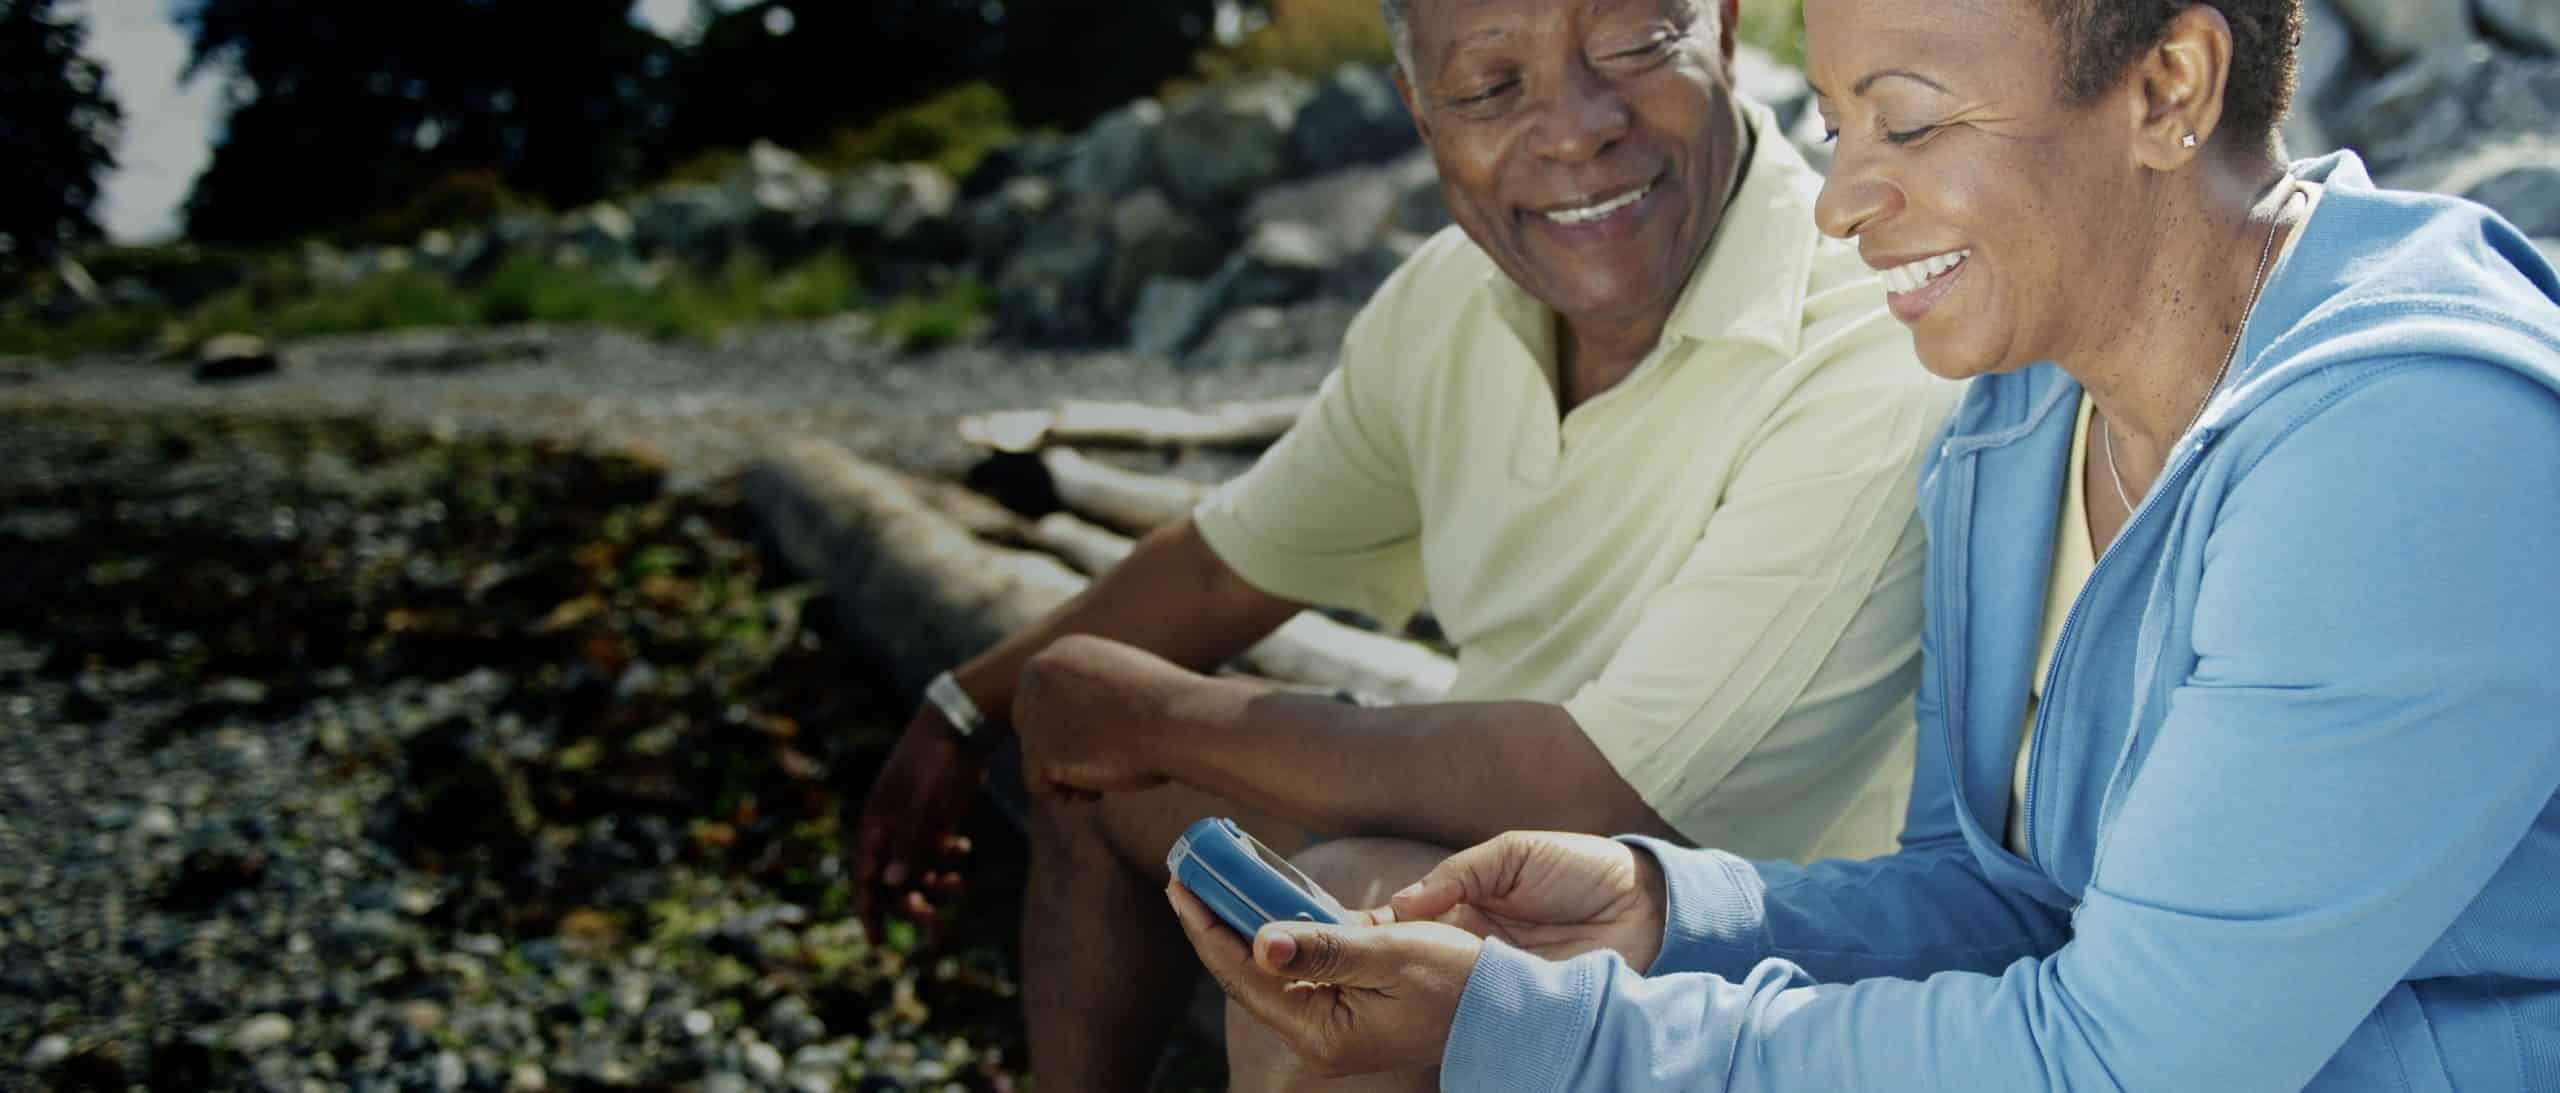 A couple sitting outside, looking at a glucose meter